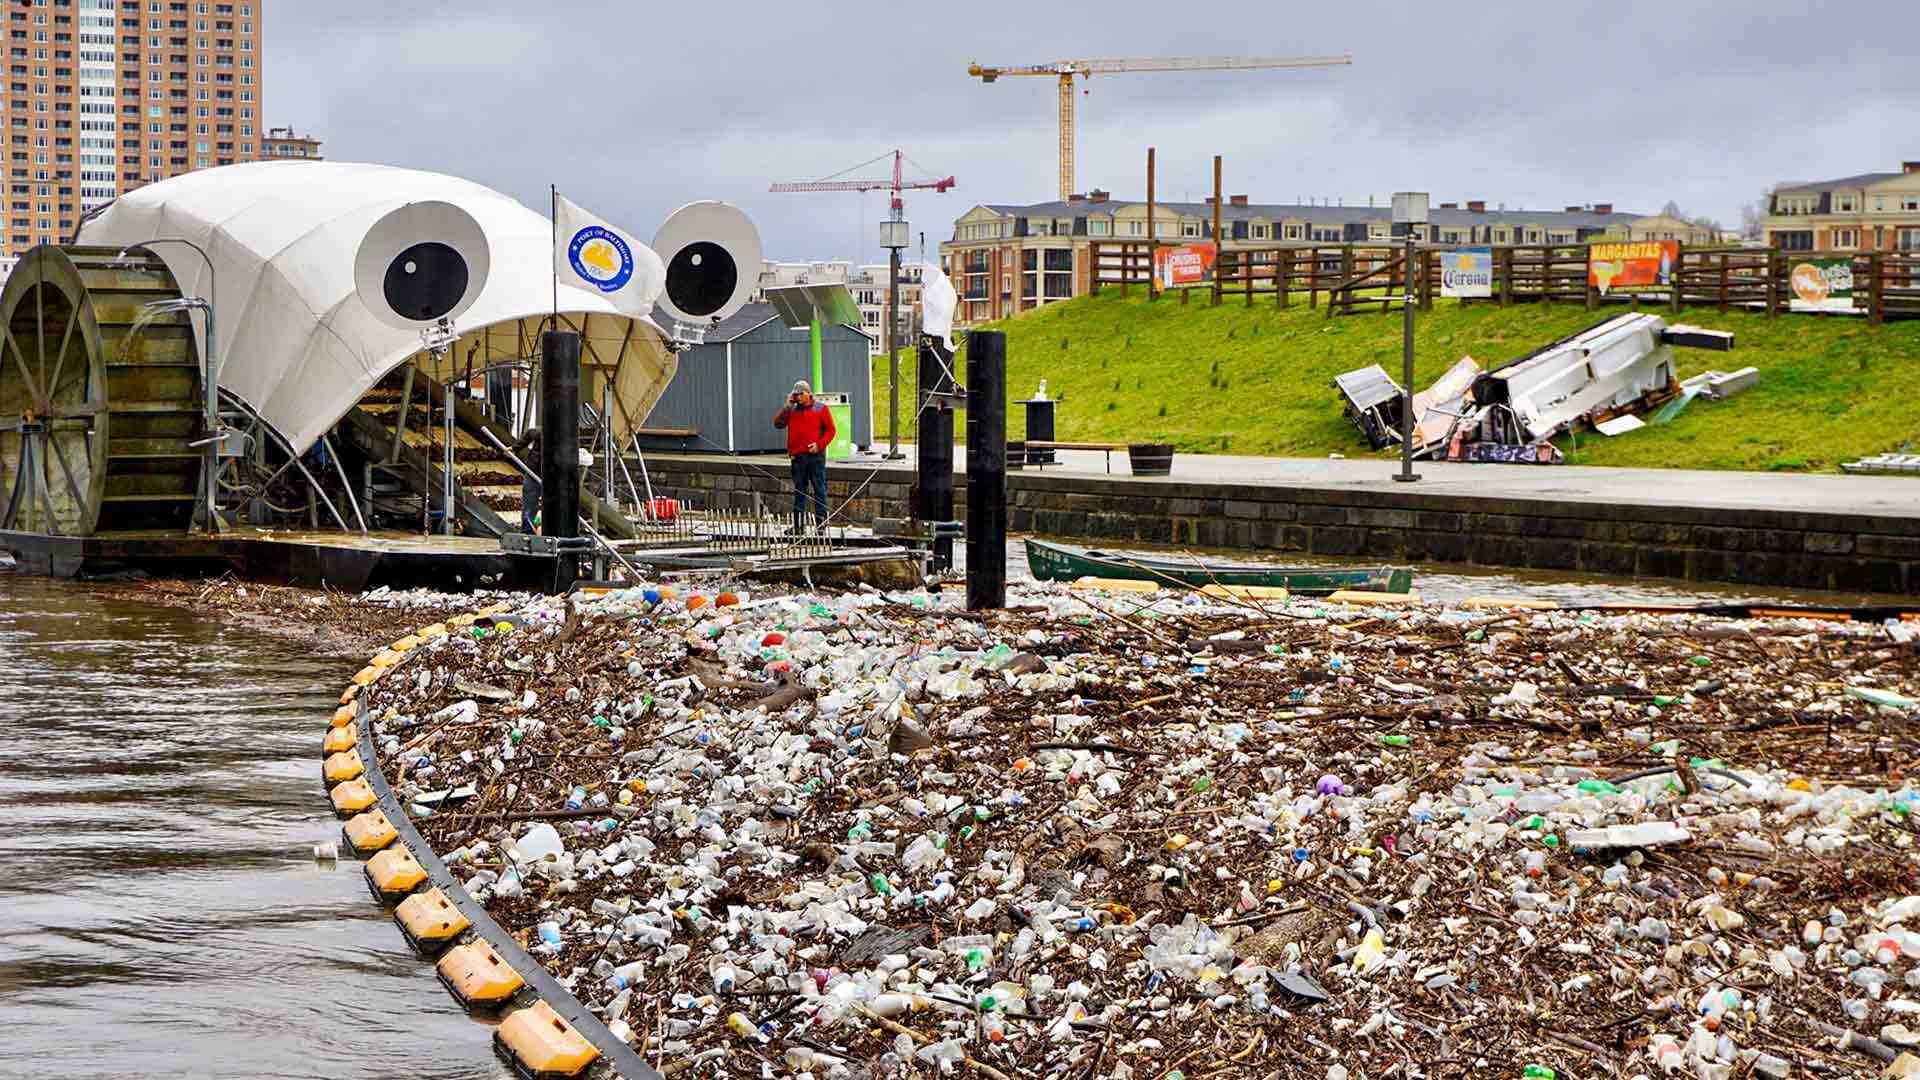 Mr. Trash Wheel collects garbage from stream